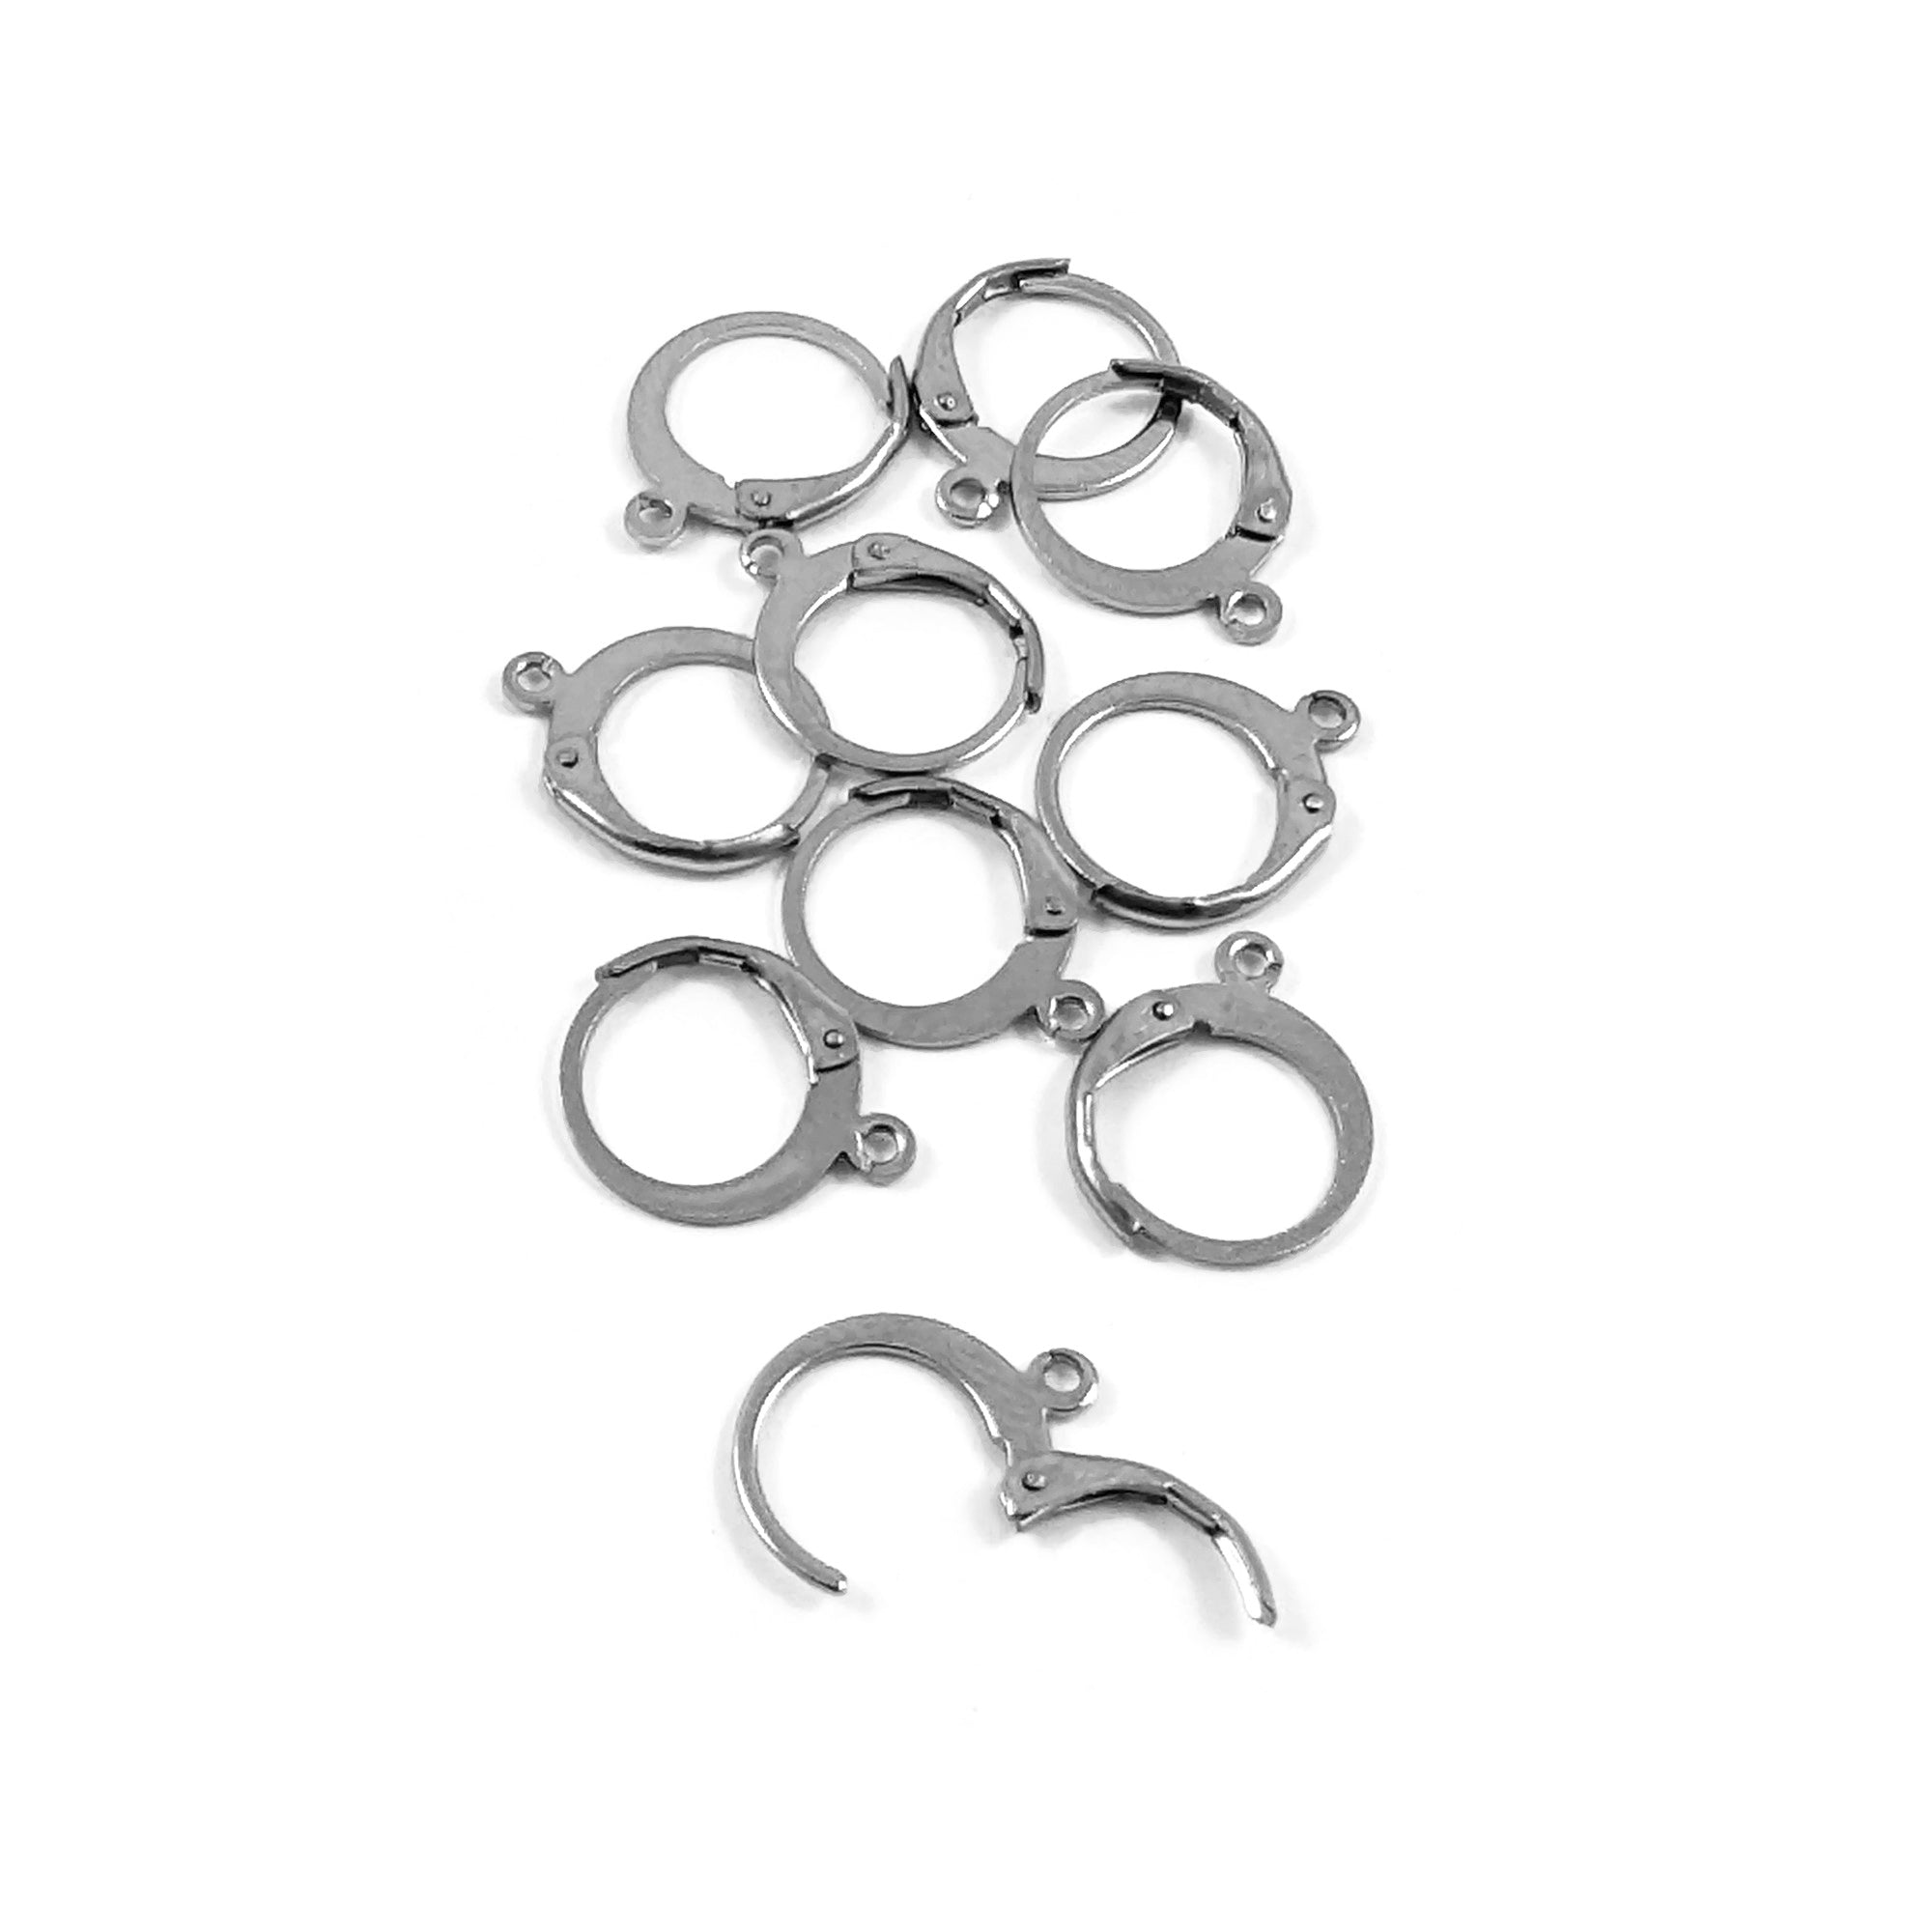 Stainless Steel Leverback Earring Hooks 100pcs French Ear Wire Lever Back  Earwire for Jewelry Making Crafting 